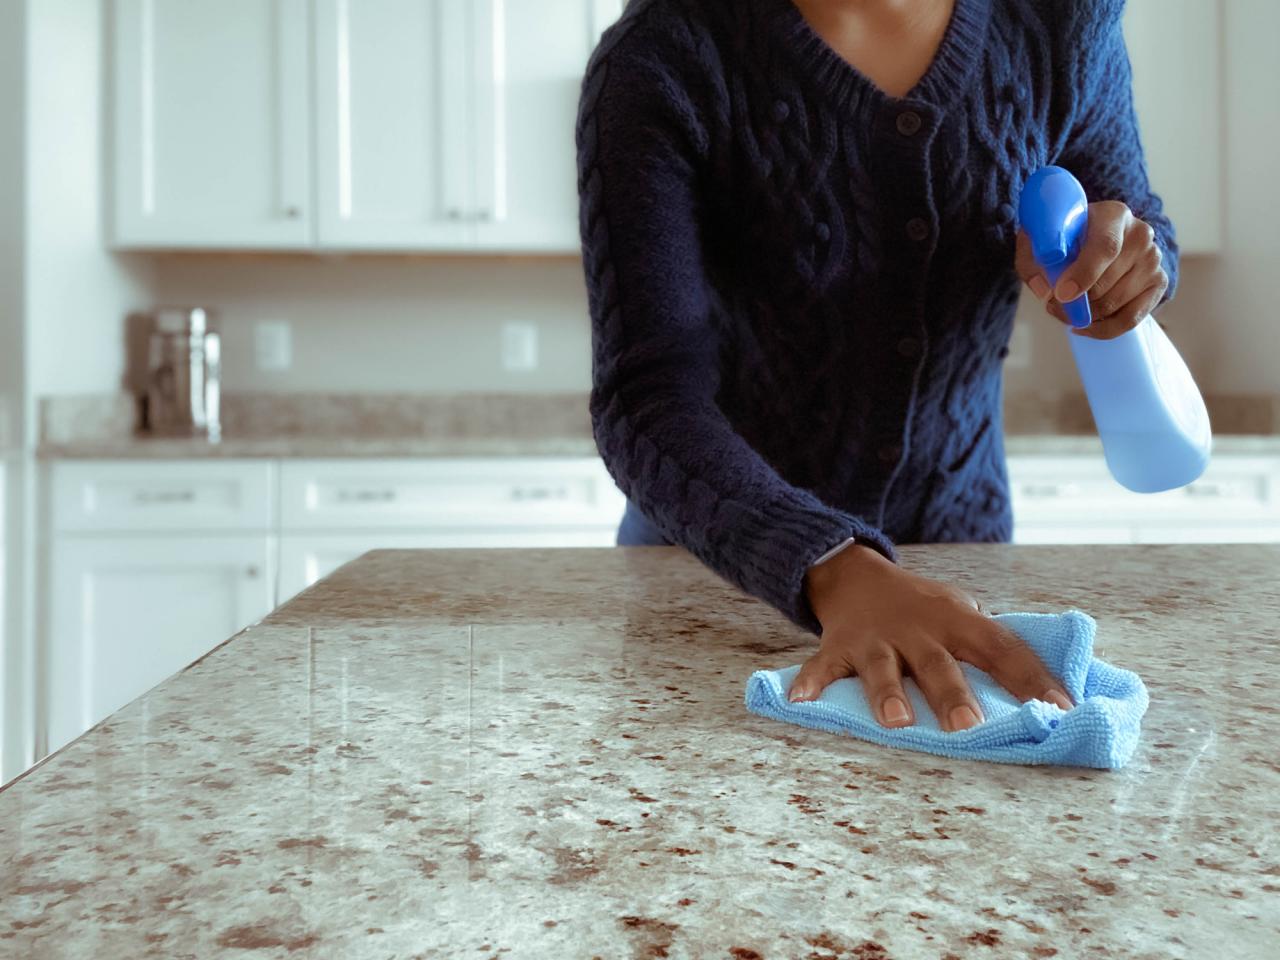 How to Clean Every Kind of Countertops, Help Around the Kitchen : Food  Network